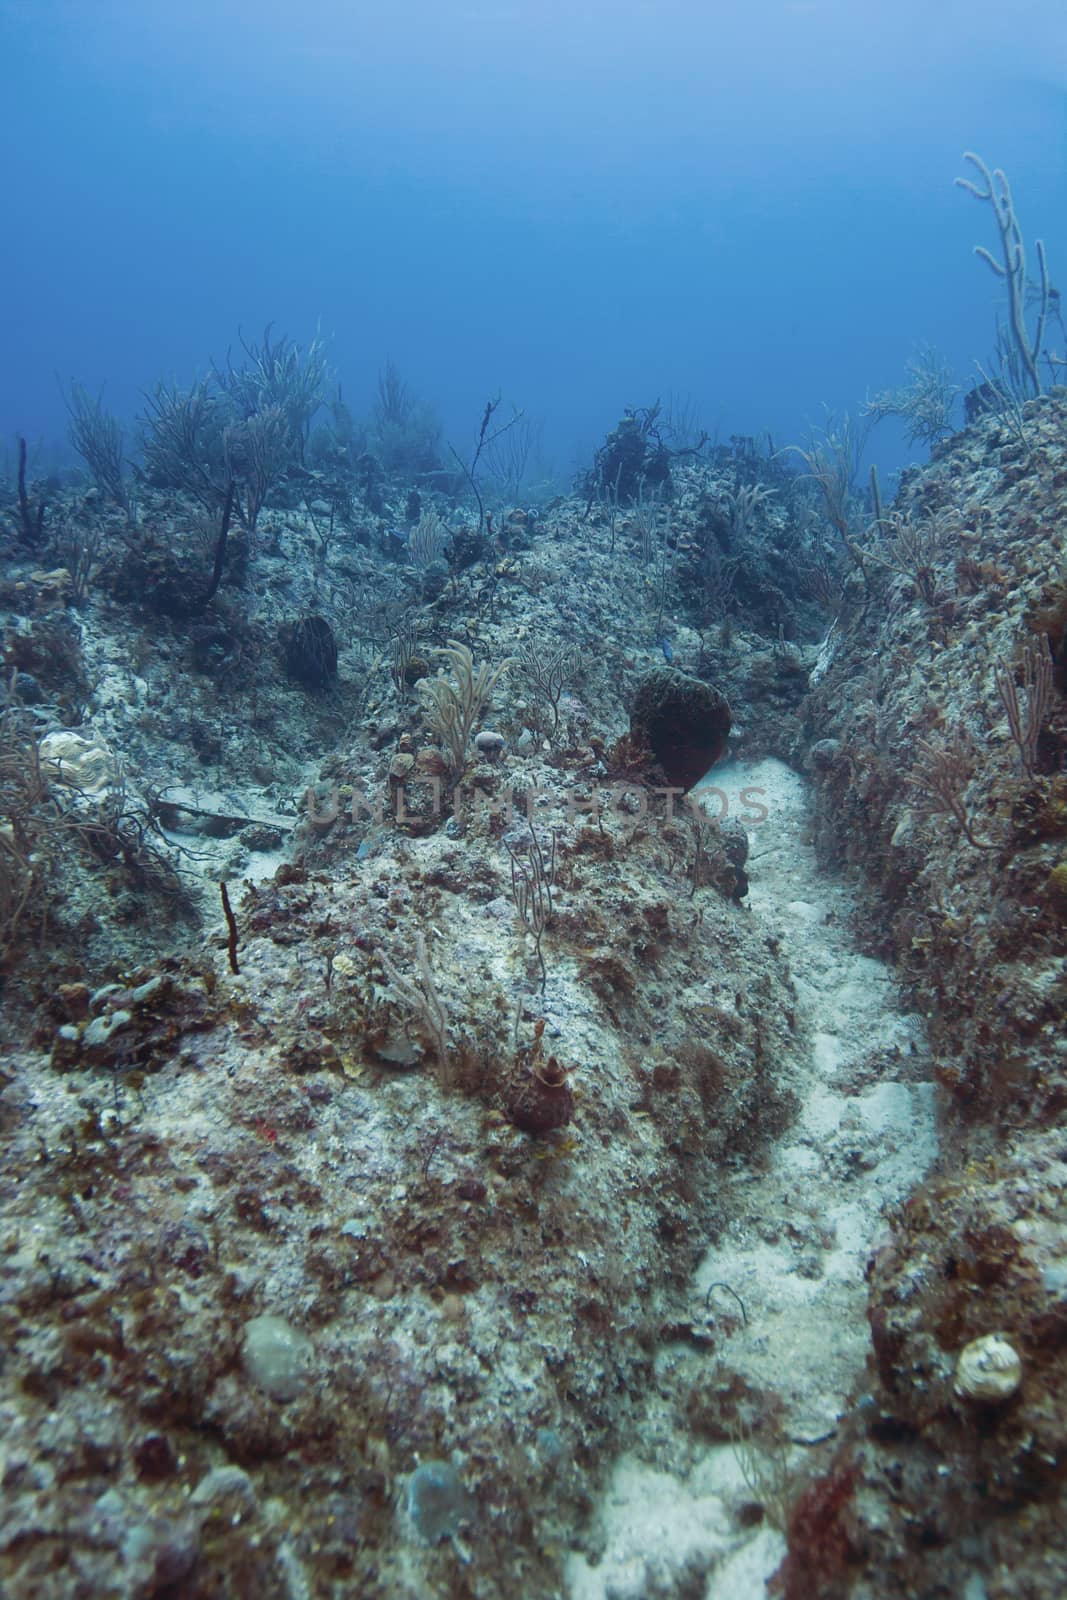 Coral reef trench slowly dying without any fish life